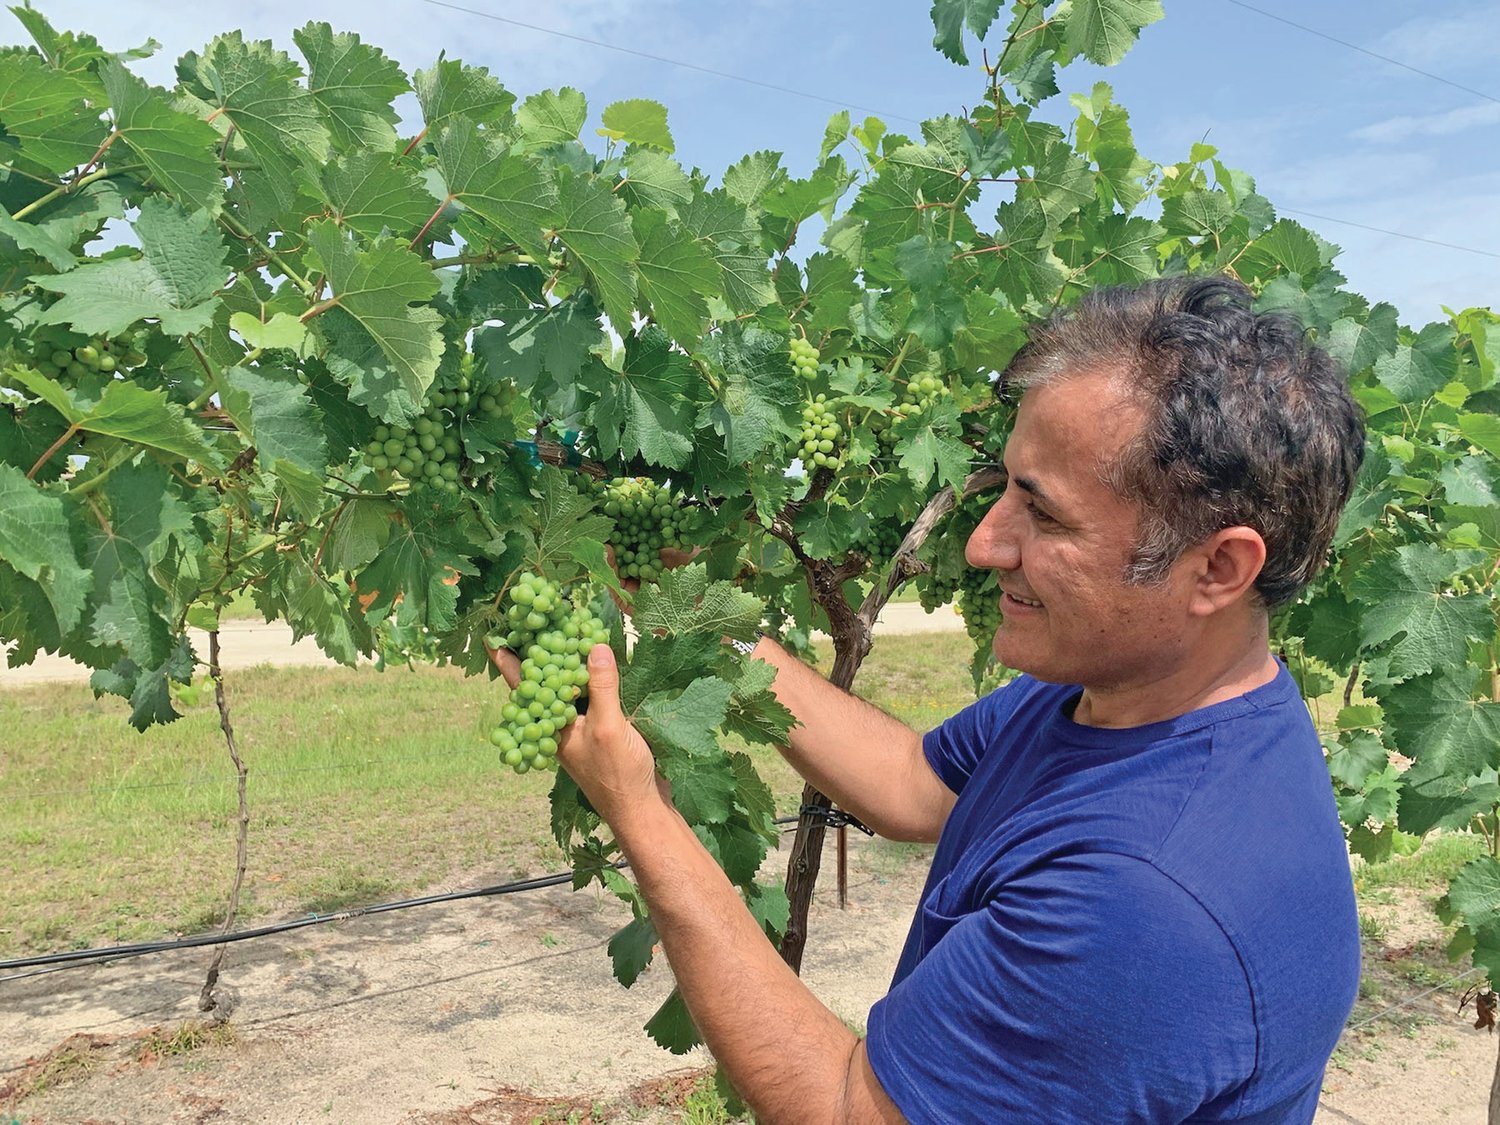 Ali Sarkhosh, UF/IFAS assistant professor of horticultural sciences, examines grapes in a research field.